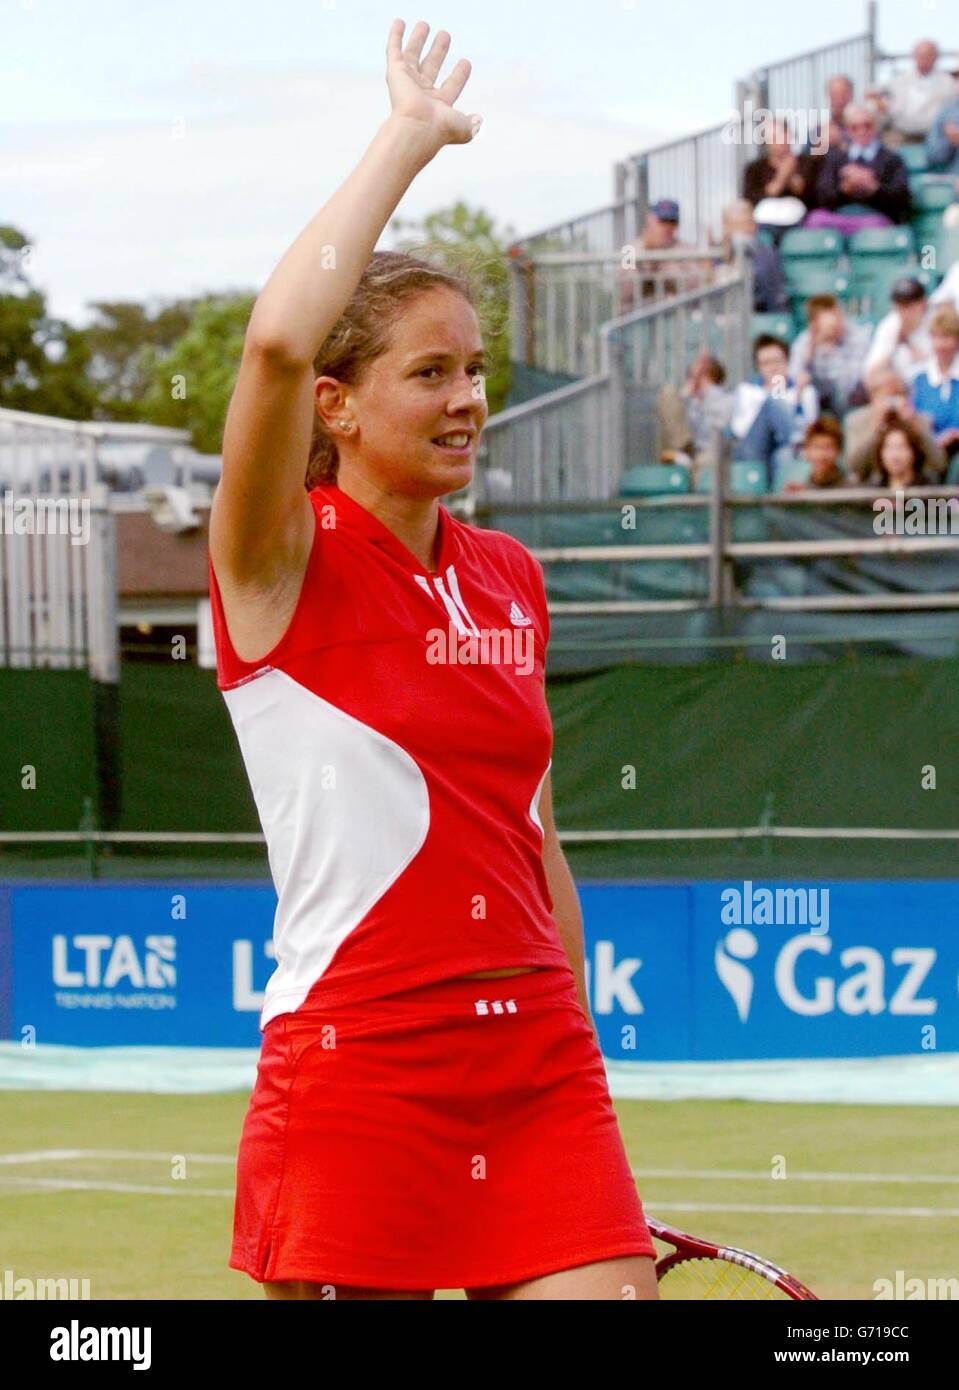 Patty Schnyder acknowledges the crowd after winning against Saori Obata in the DFS Classic, International women's tennis tournament at the Edgbaston Priory Club, Birmingham. Stock Photo